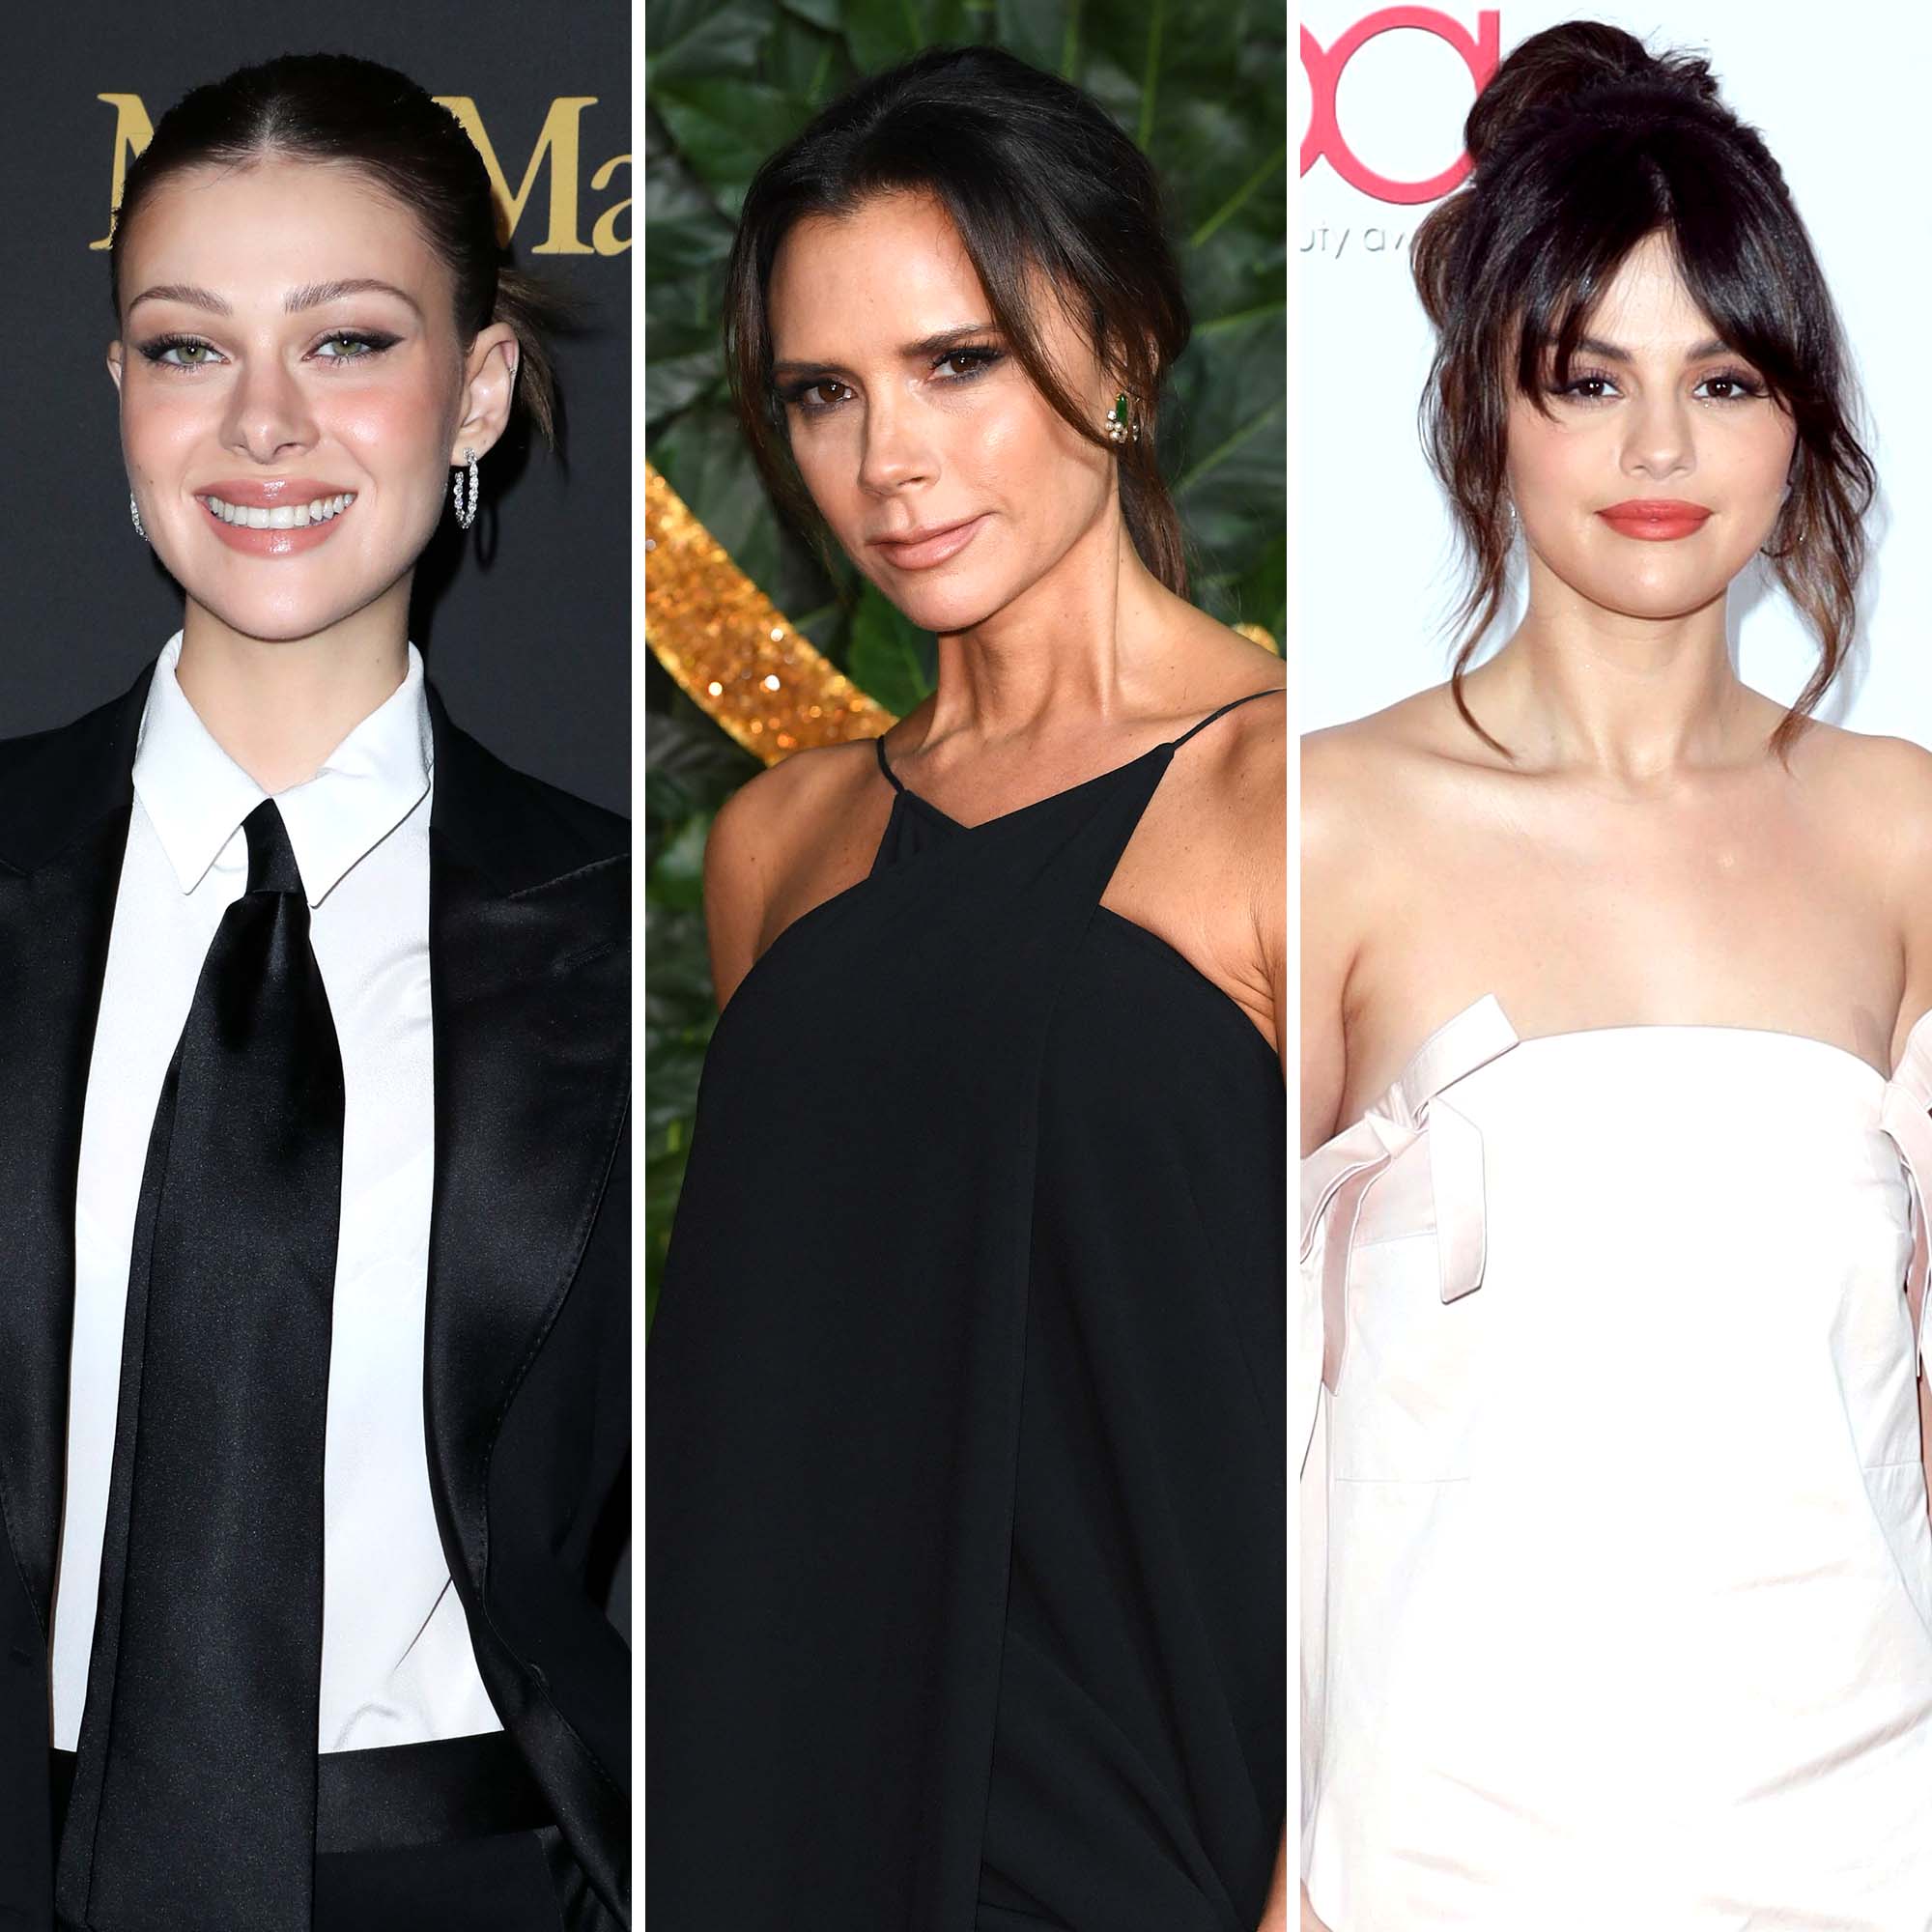 The fitness routines loved by Victoria Beckham, Selena Gomez and more